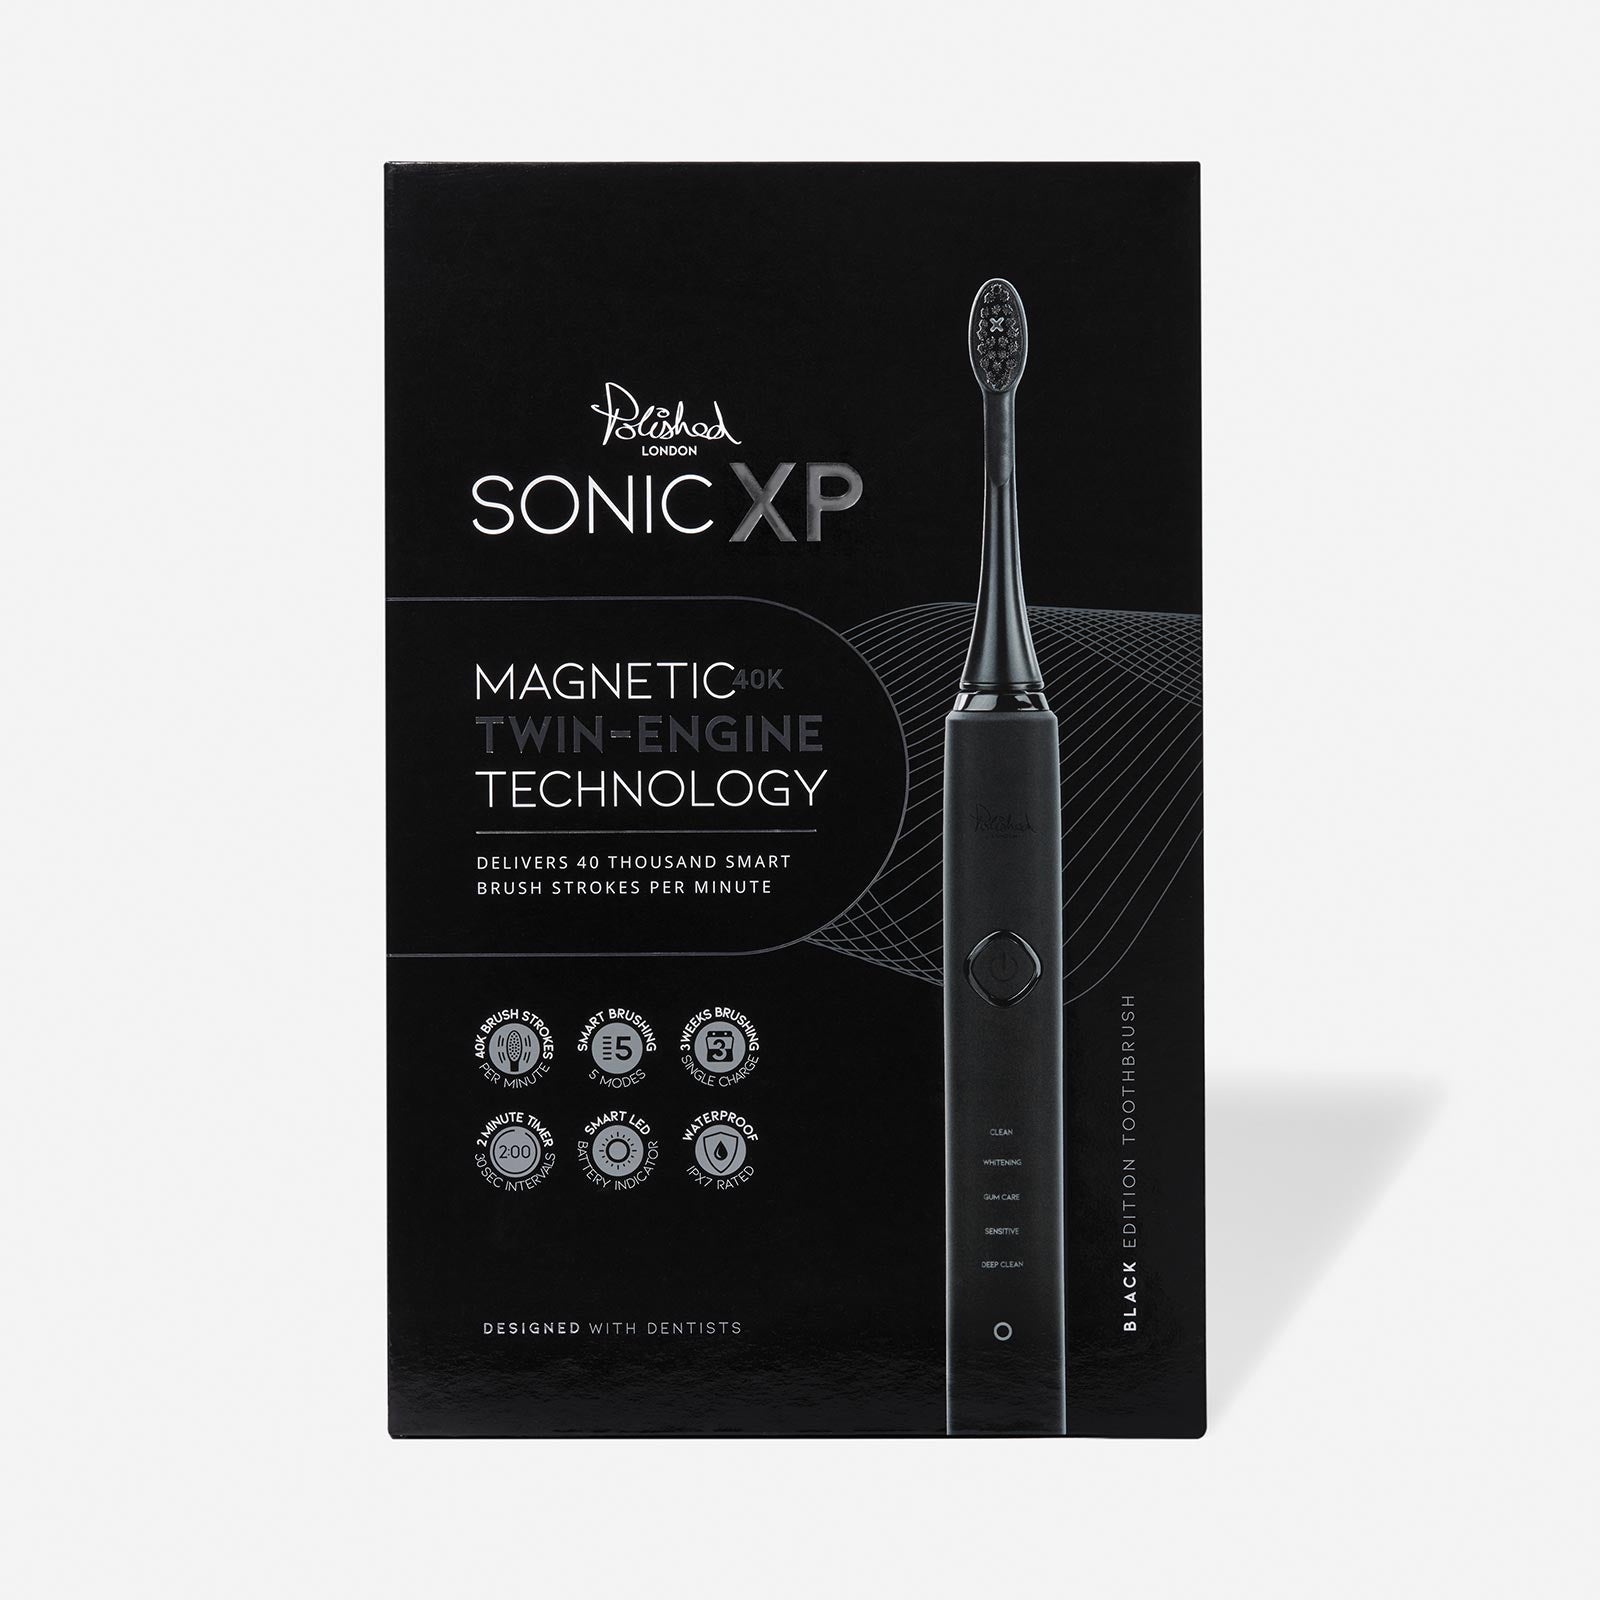 The Polished London Sonic XP Toothbrush box in black